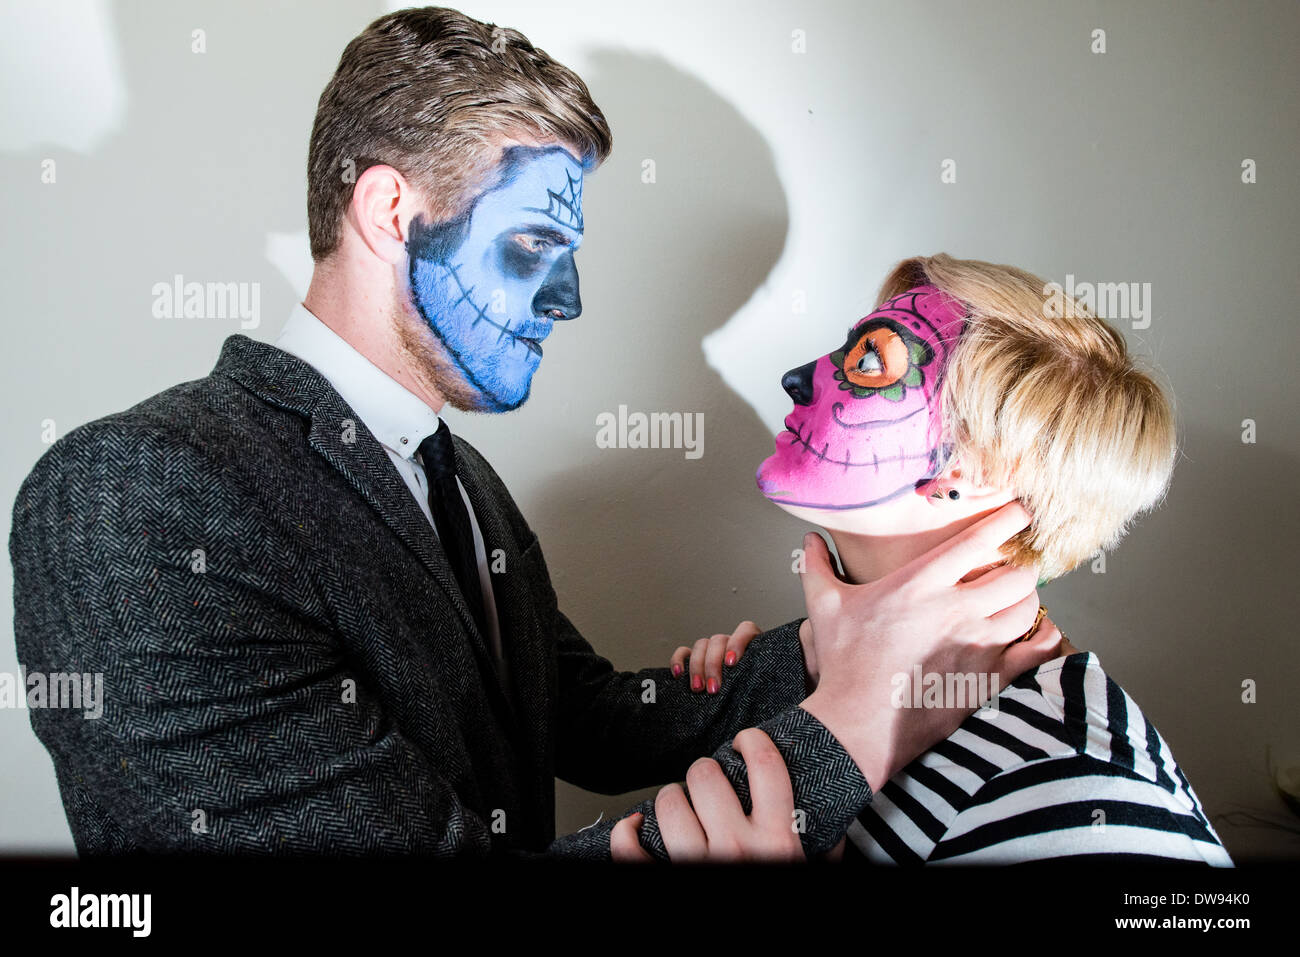 A smartly dressed young couple wearing zombie style face paint, with the man seemingly strangling the startled woman. Stock Photo